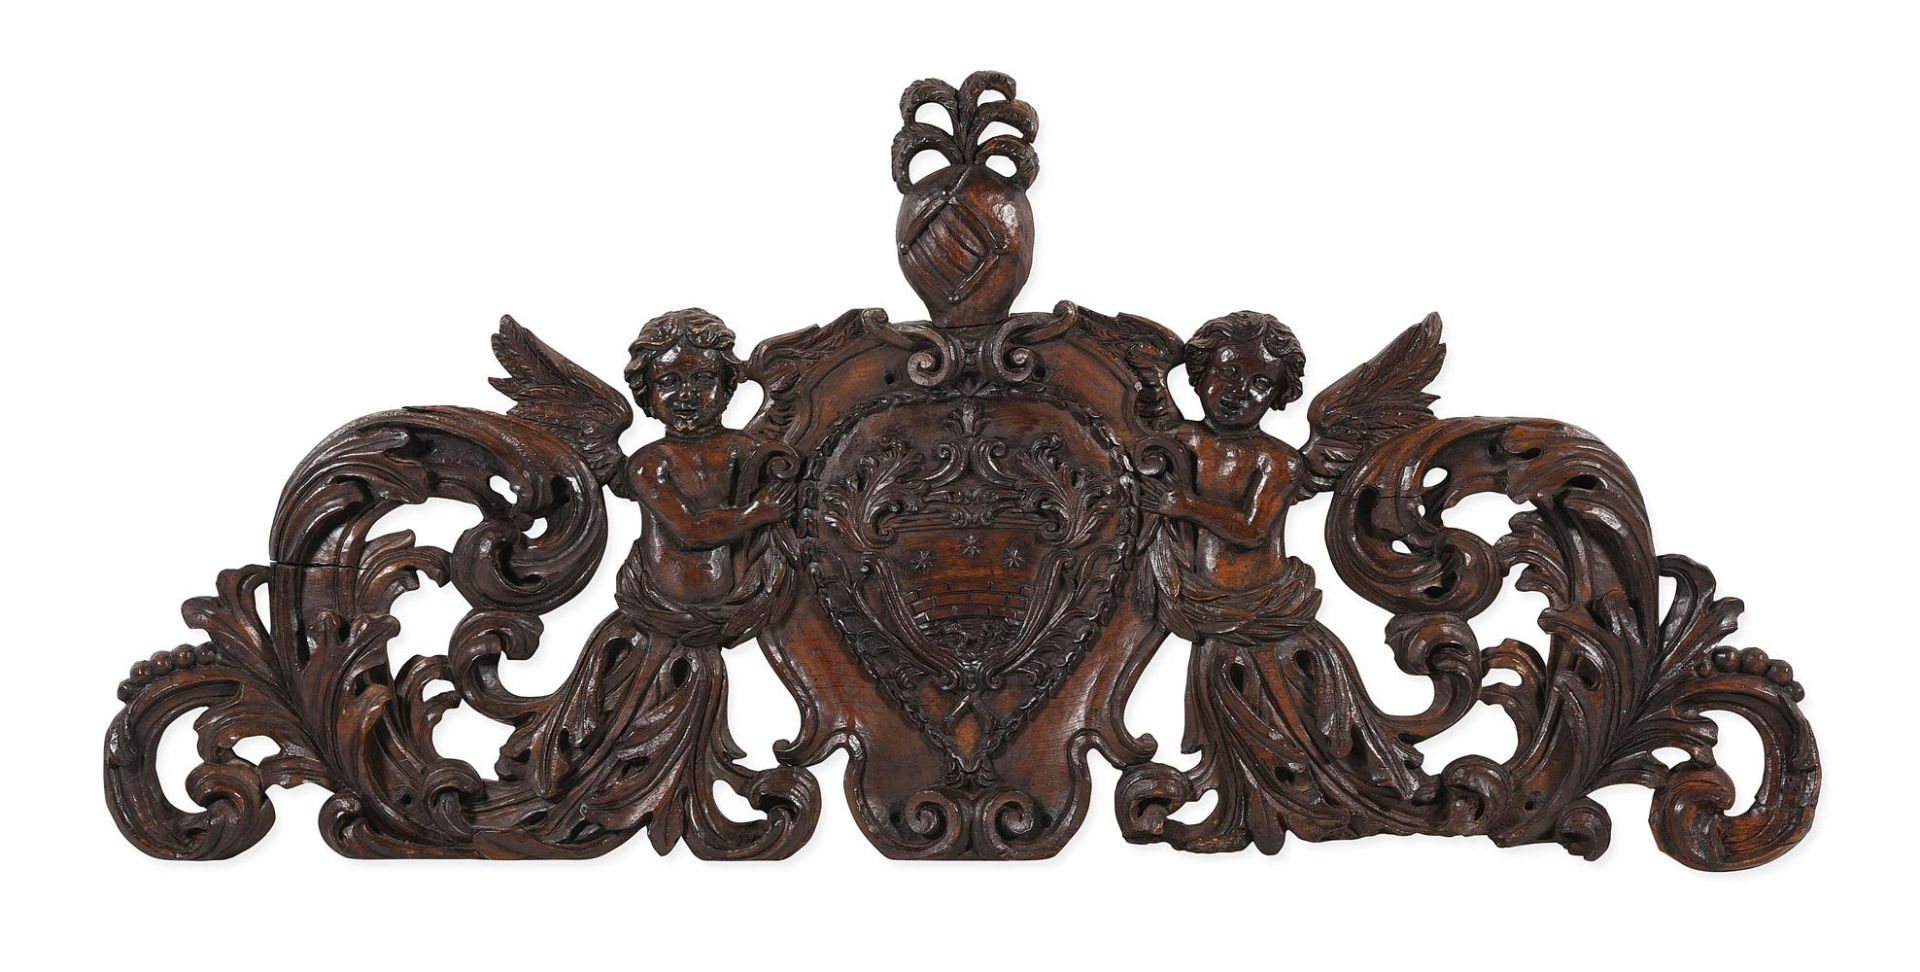 A CARVED COAT OF ARMS, ITALIAN, MID 17TH CENTURY